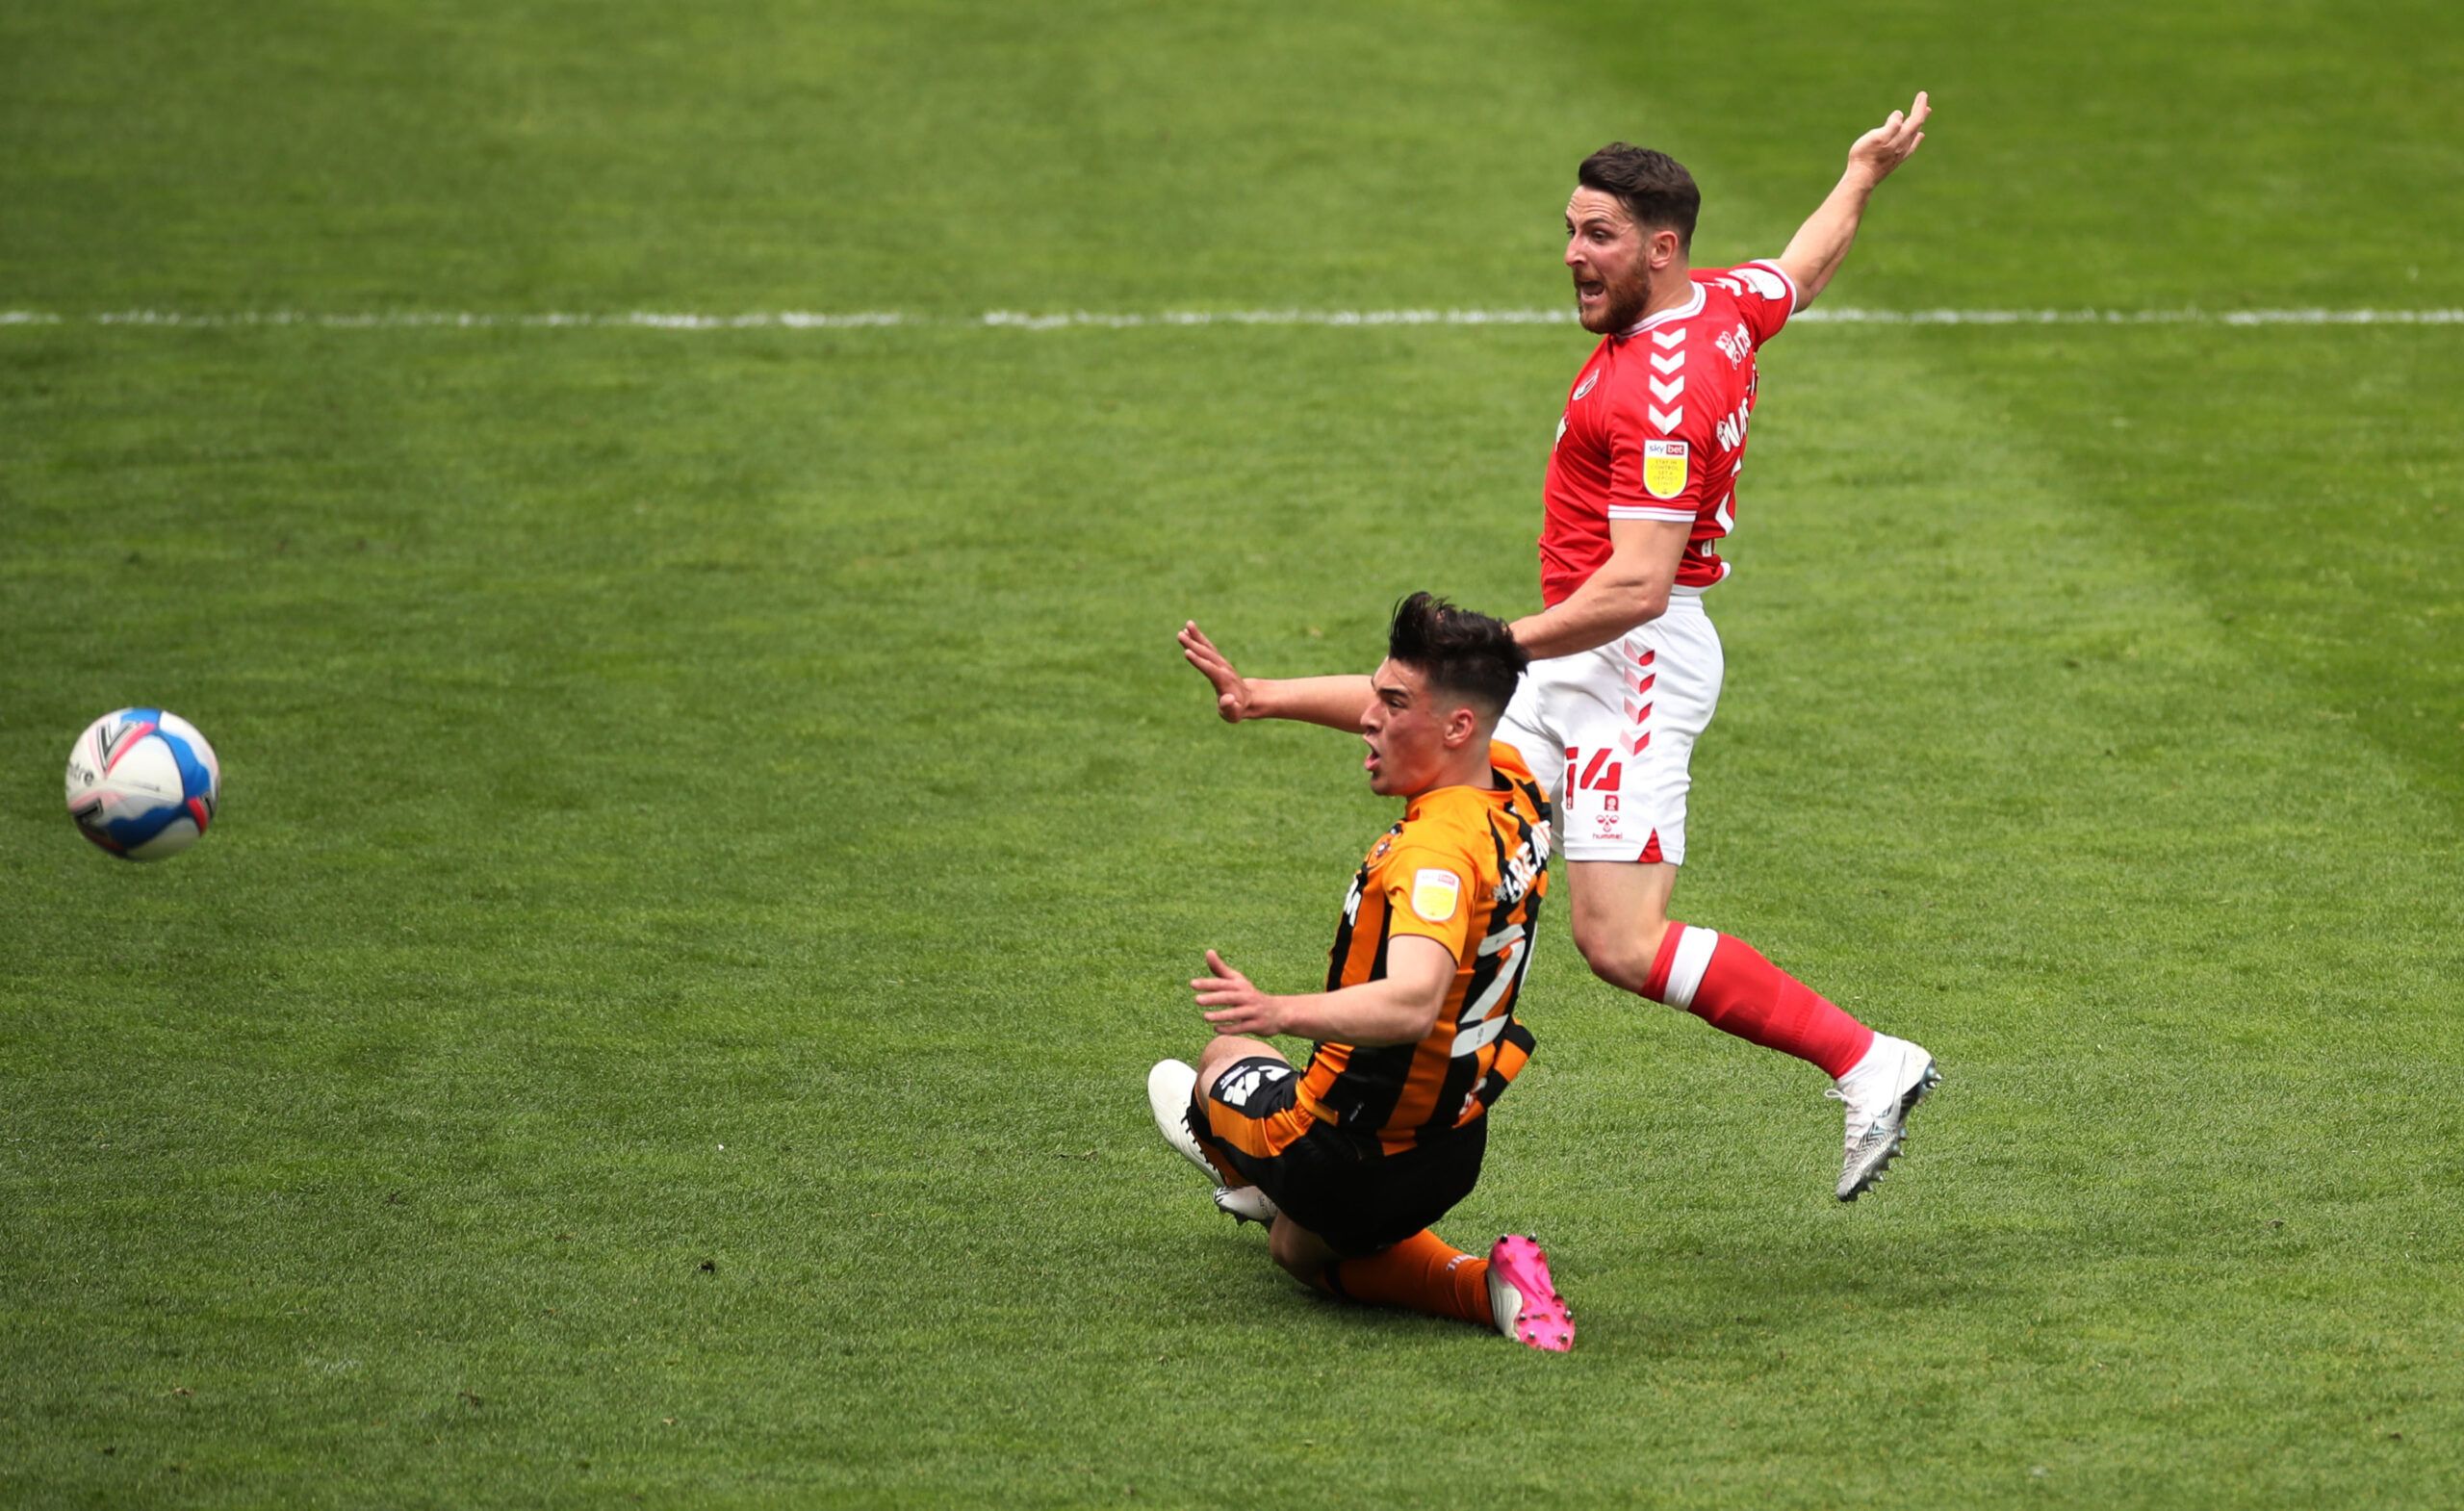 Soccer Football - League One - Charlton Athletic v Hull City - The Valley, London, Britain - May 9, 2021 Charlton Athletic's Conor Washington shoots at goal Action Images/Peter Cziborra EDITORIAL USE ONLY. No use with unauthorized audio, video, data, fixture lists, club/league logos or 'live' services. Online in-match use limited to 75 images, no video emulation. No use in betting, games or single club /league/player publications.  Please contact your account representative for further details.